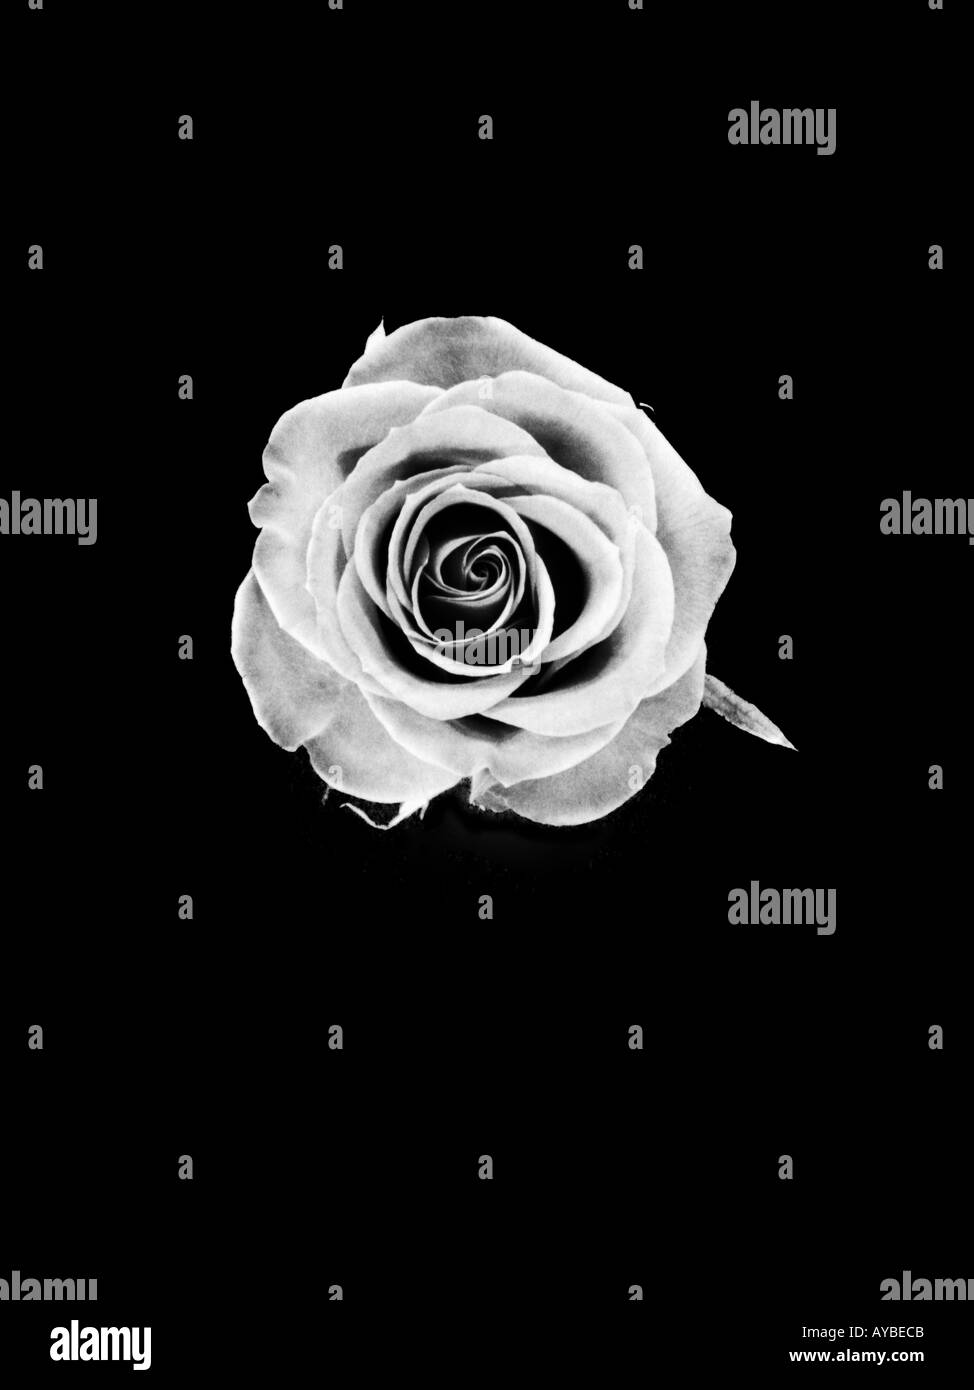 Aesthetic Flower Head Black And White Stock Photos Images Alamy